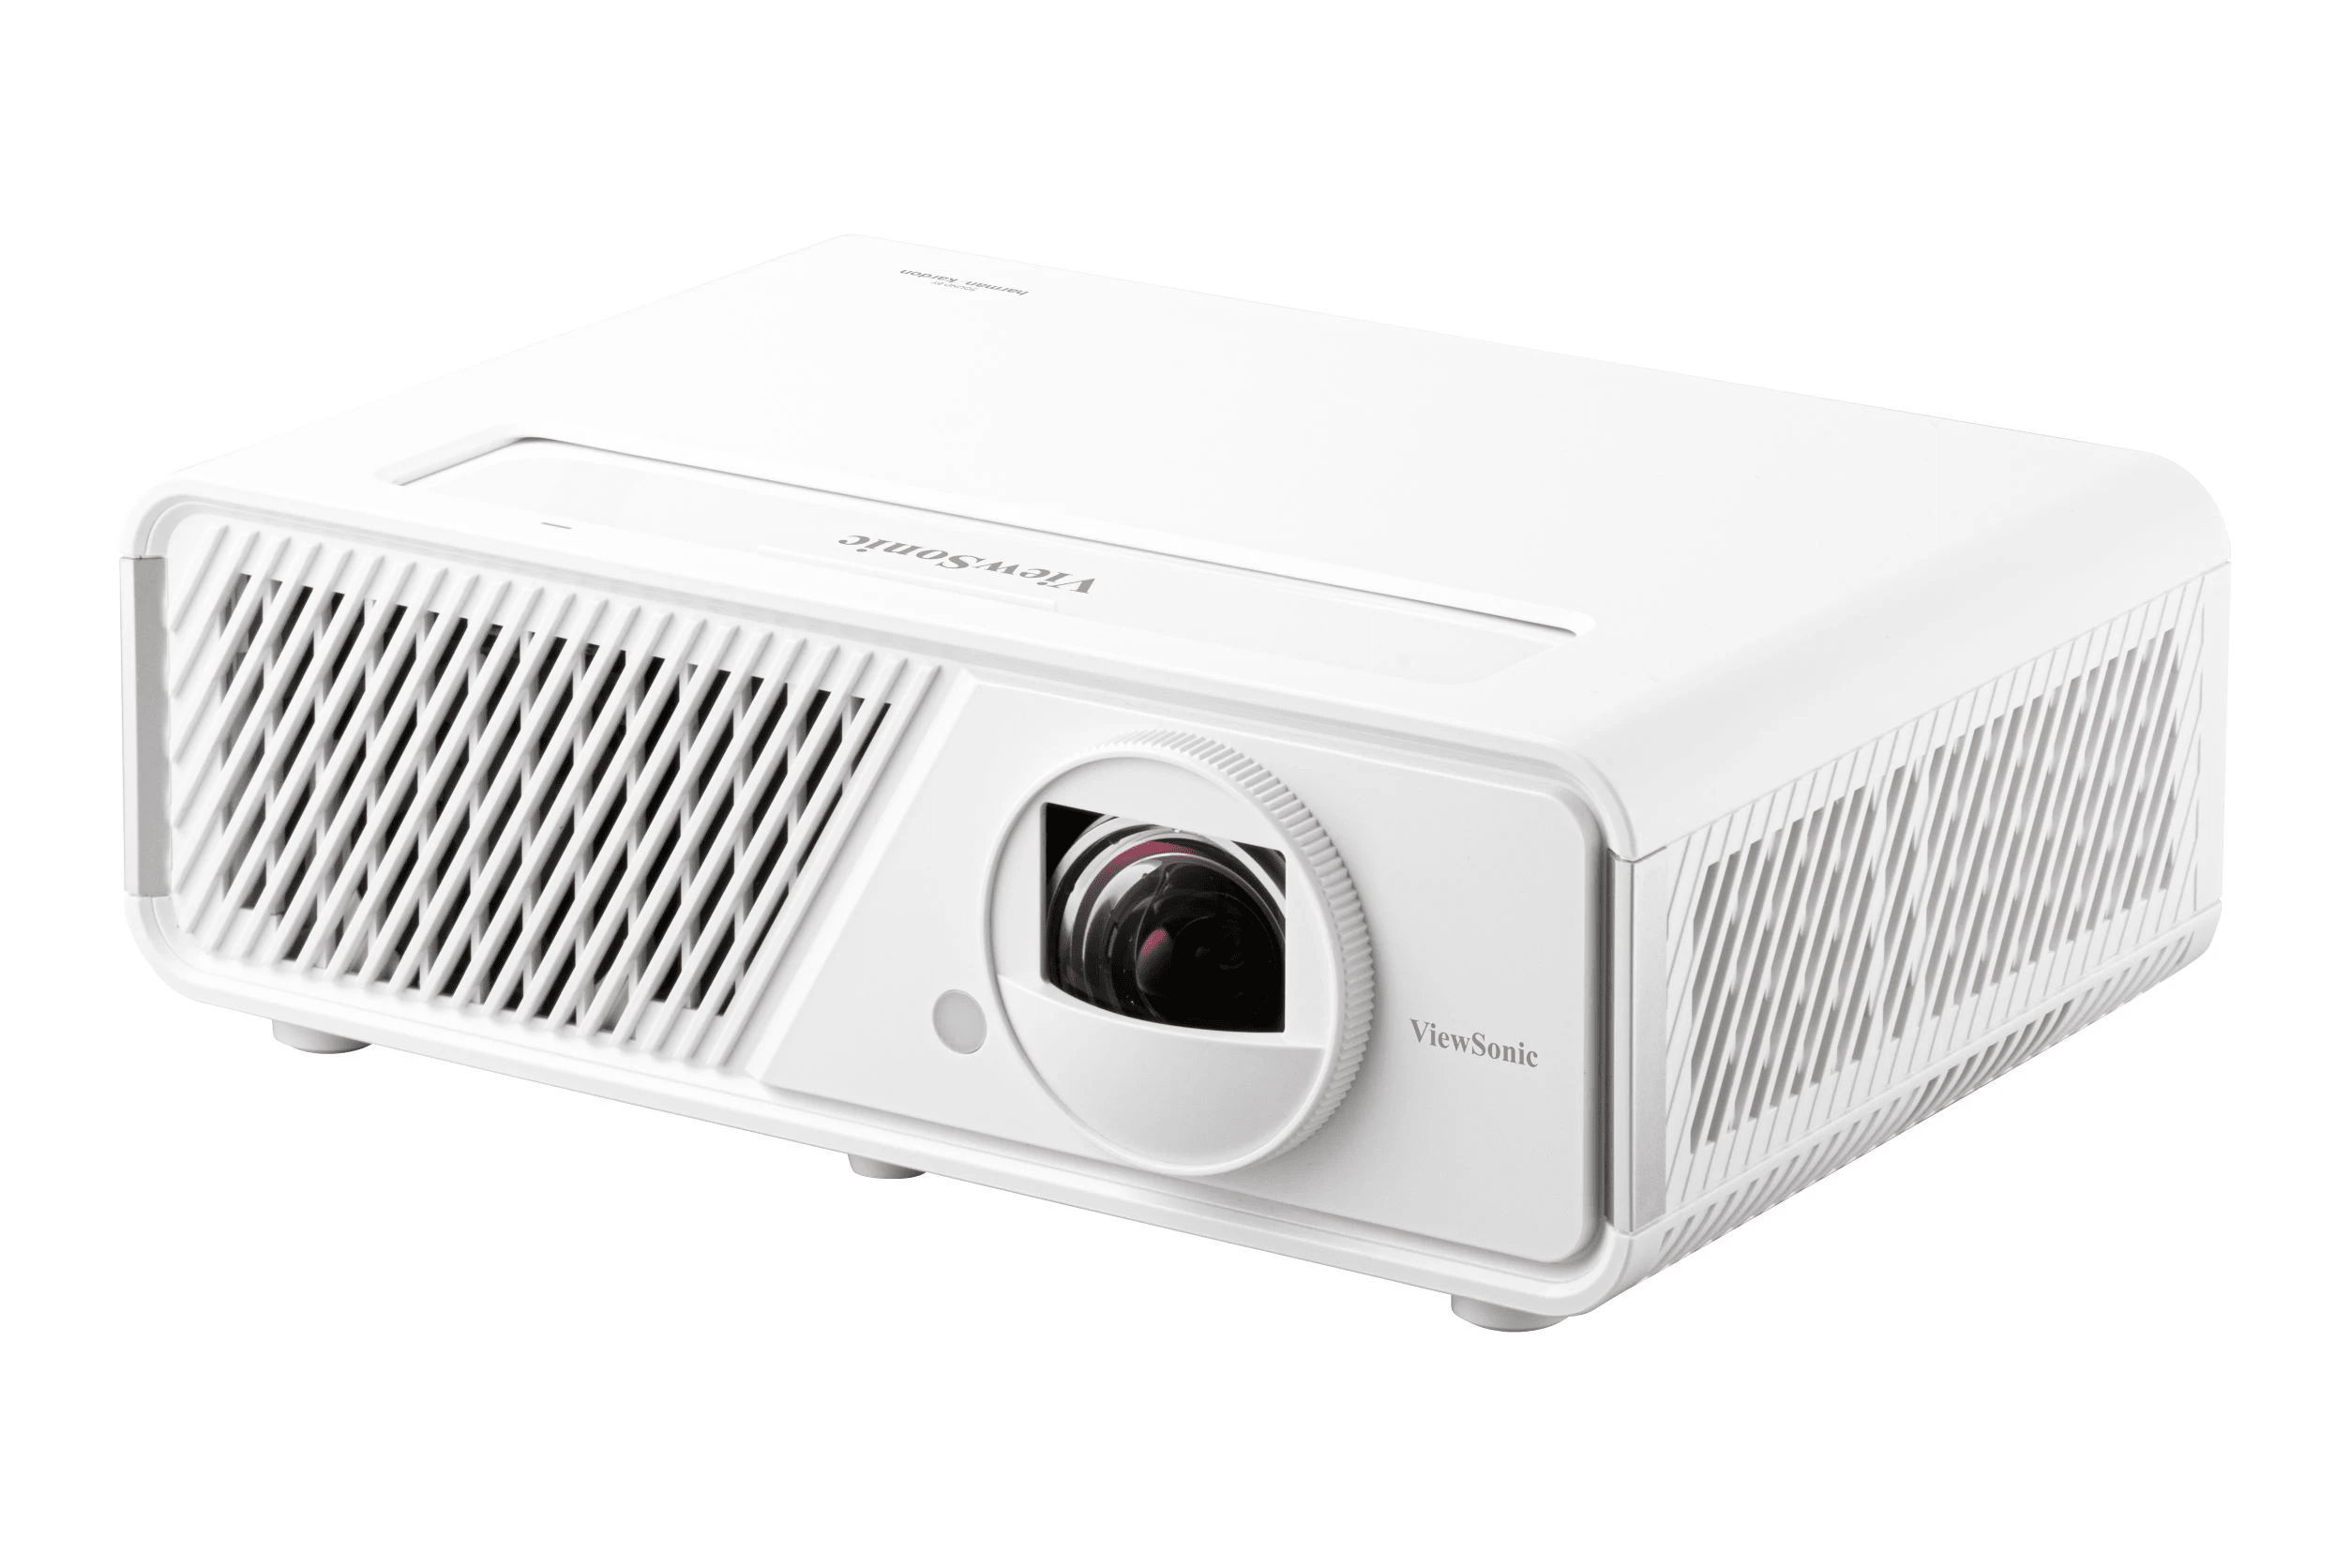 X1 and X2 projectors features H/V keystone, 4 corner adjustment, and auto keystone, to deliver 											perfectly-shaped images.